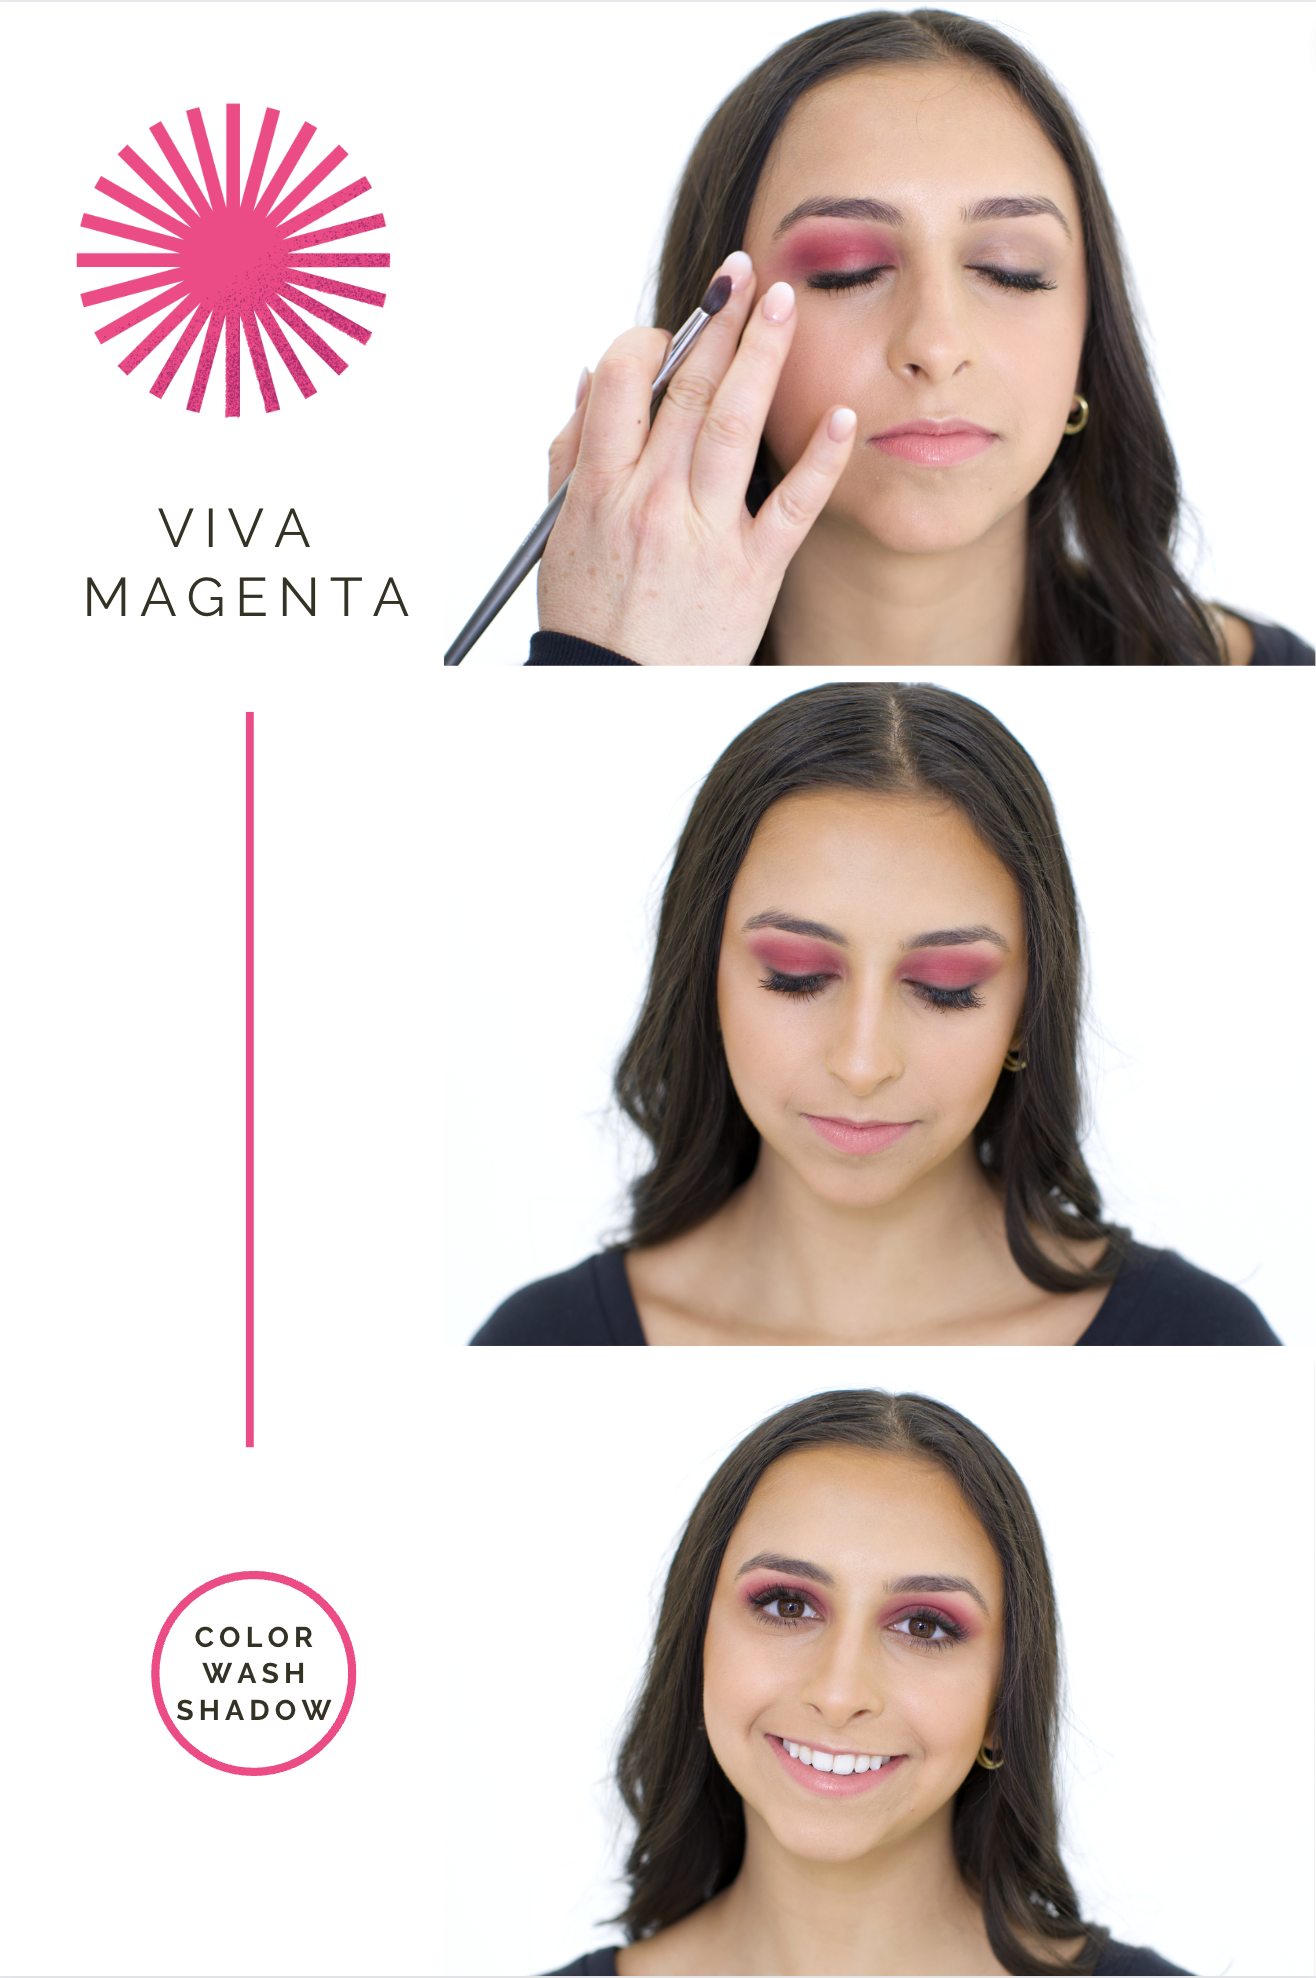 Use a magenta color wash all over the lid for a quick pop of color!